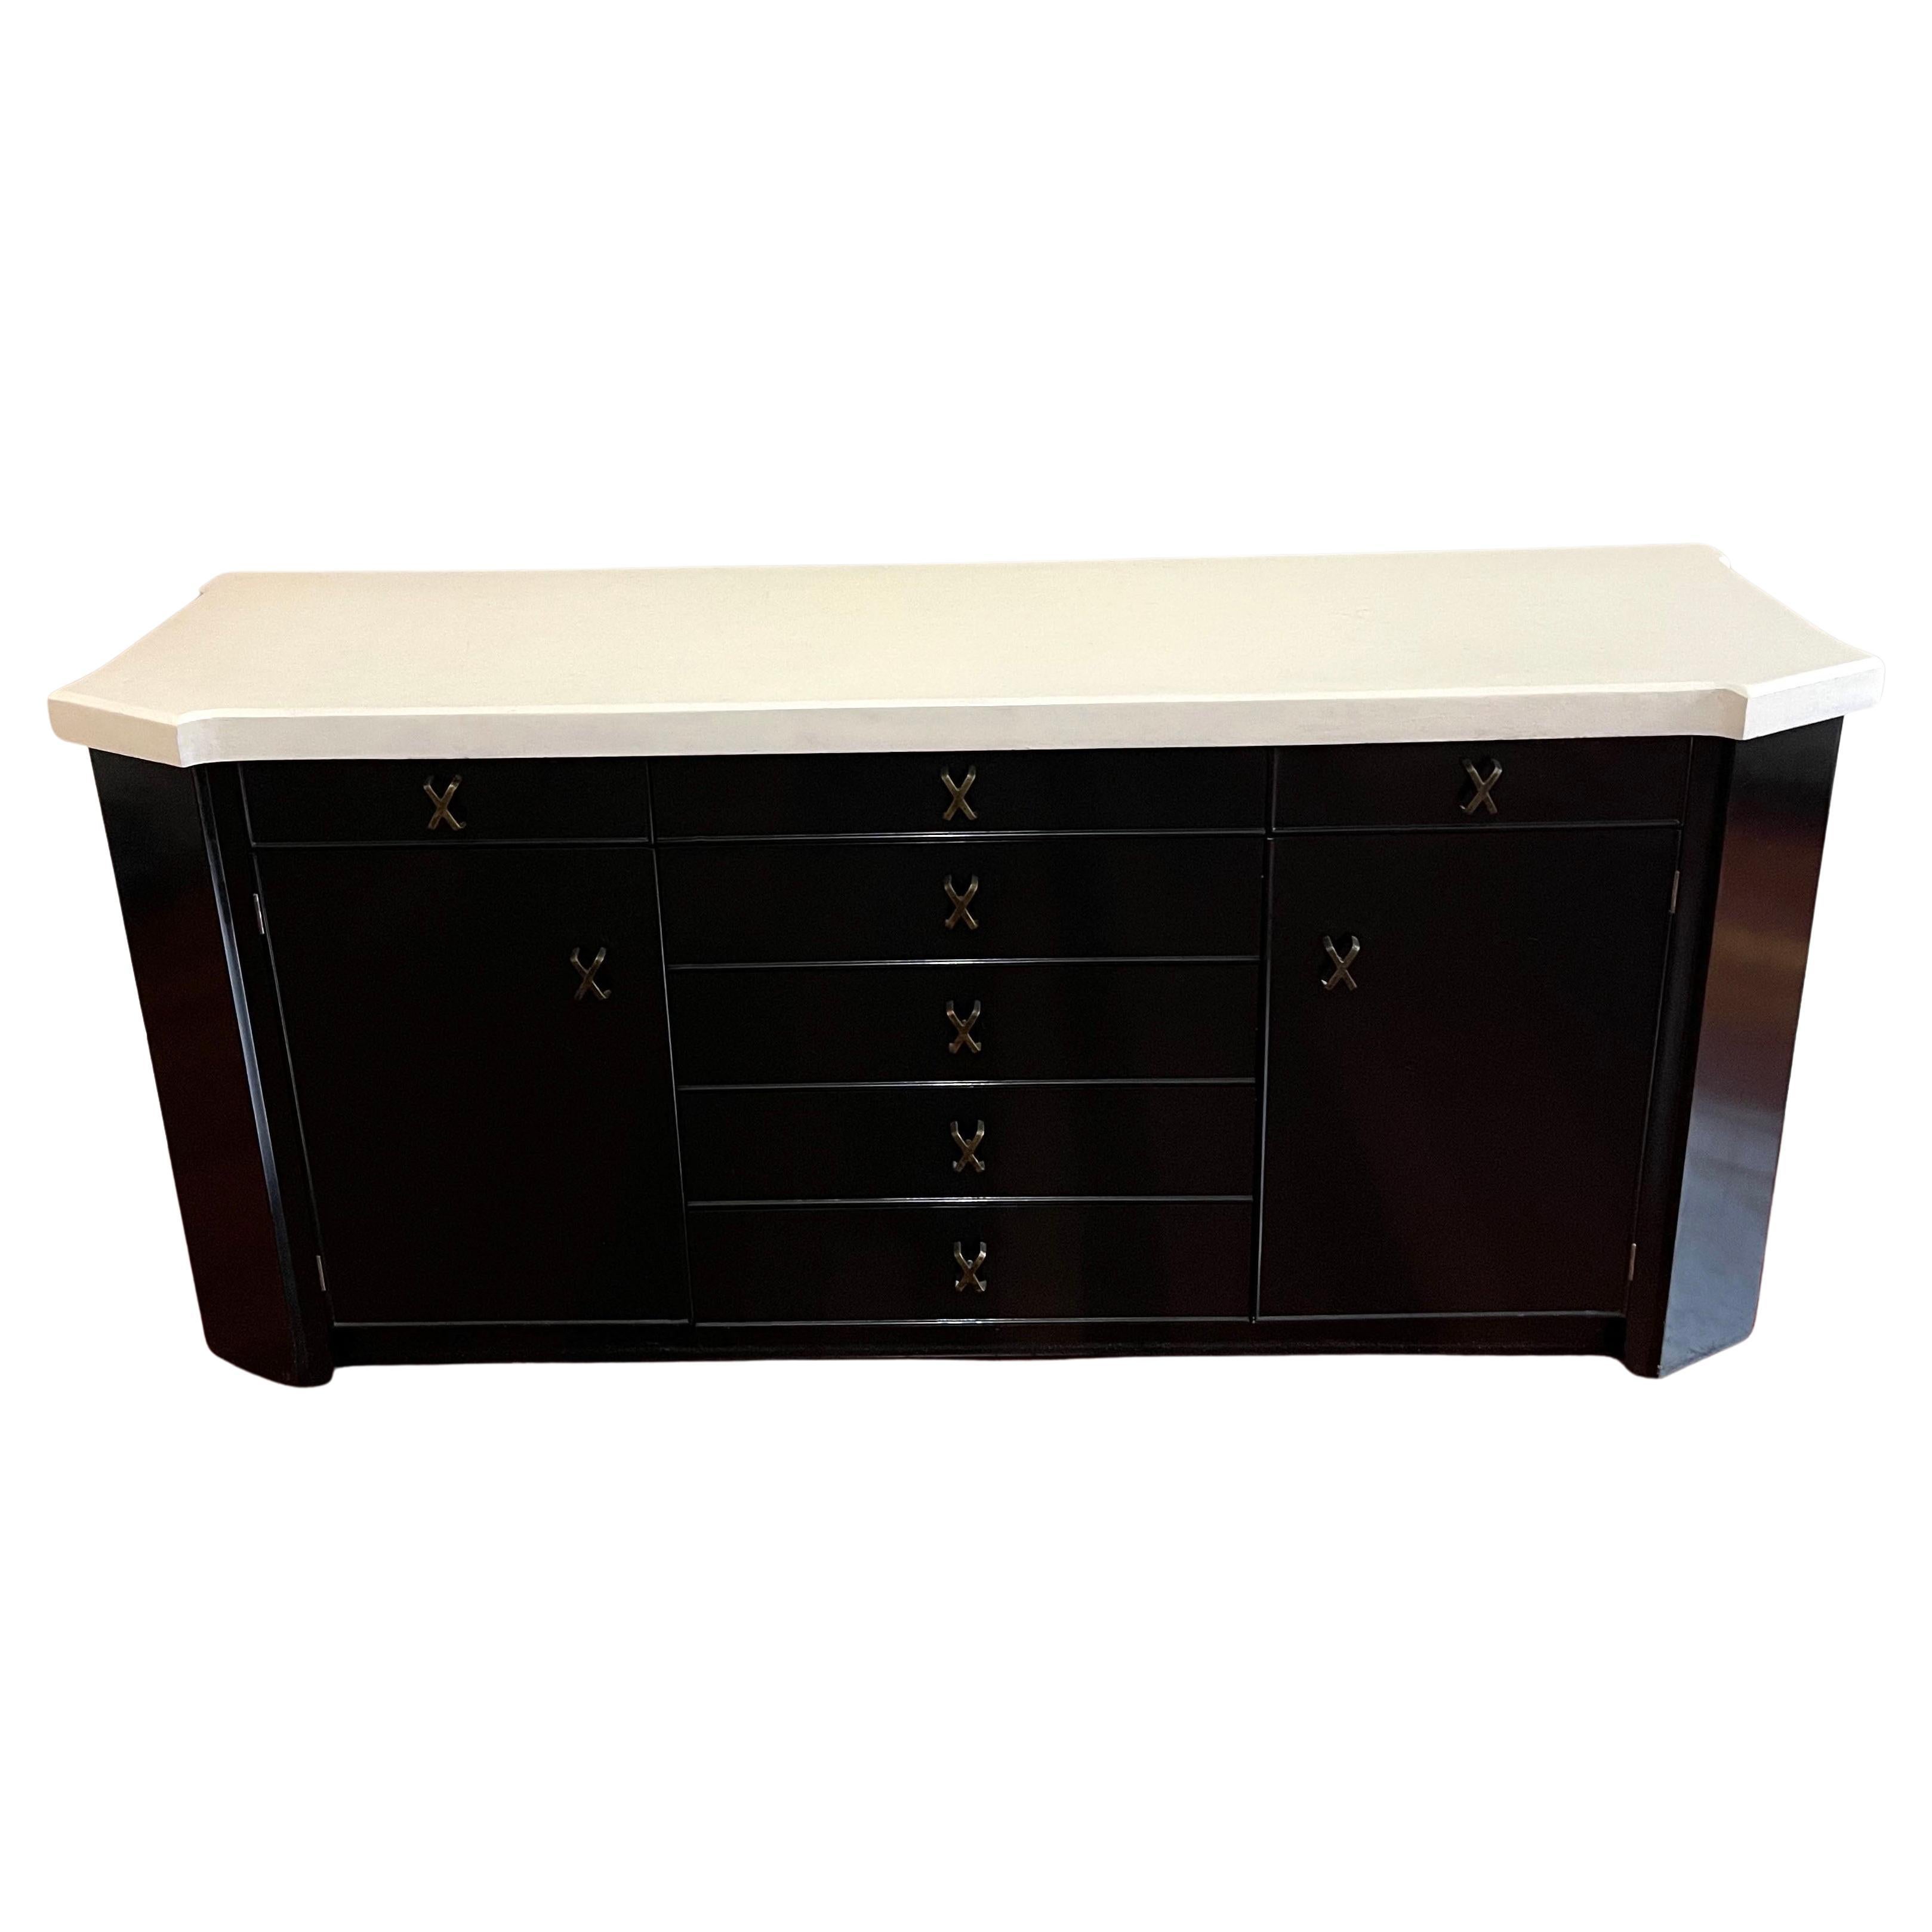 Paul Frankl for Johnson Furniture Co. x Pull Cork Top Sideboard